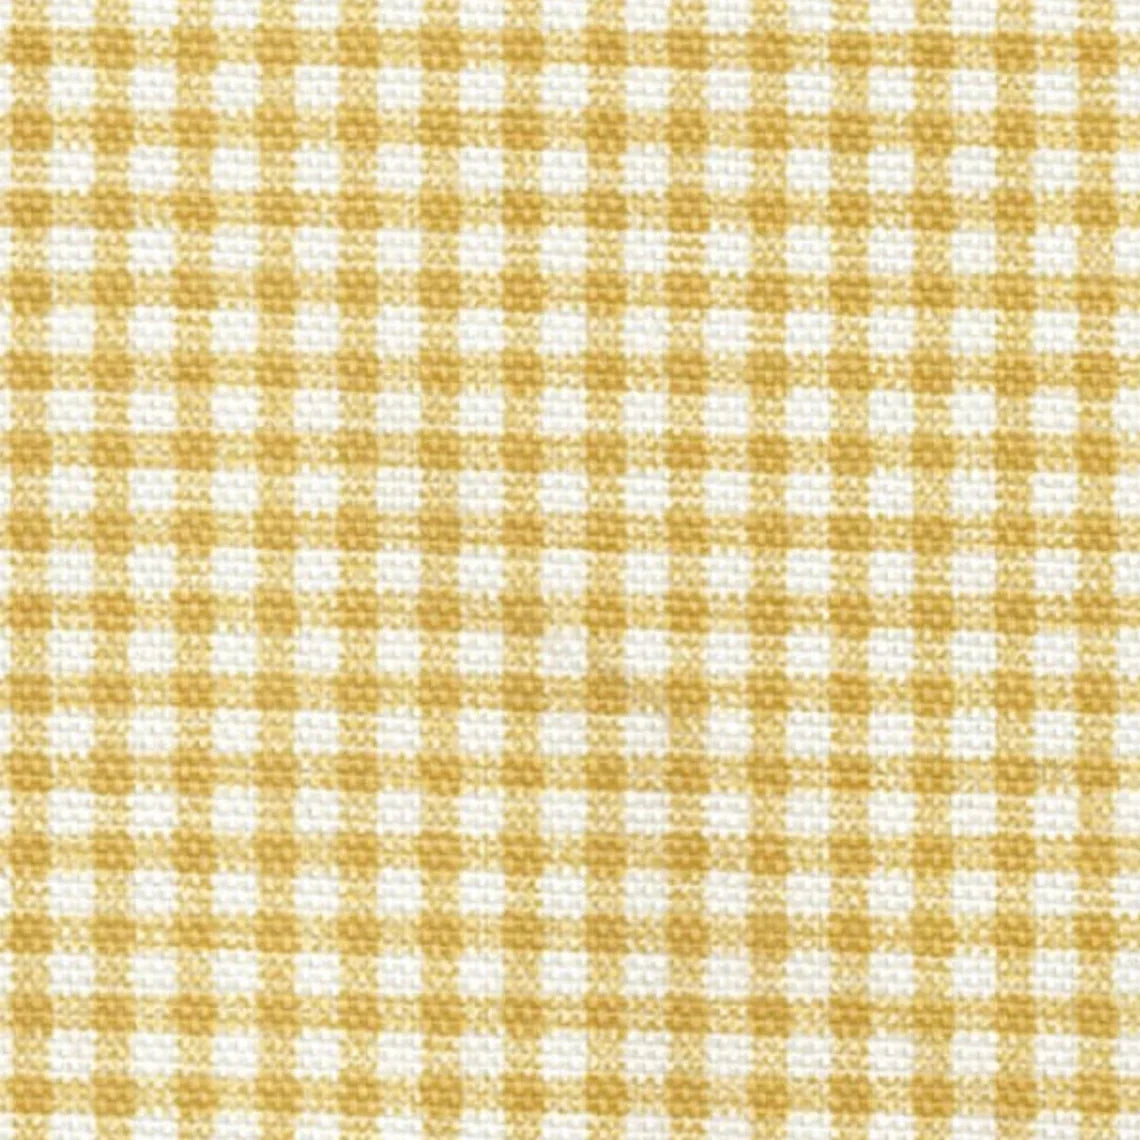 tie-up valance in farmhouse barley yellow gold gingham check